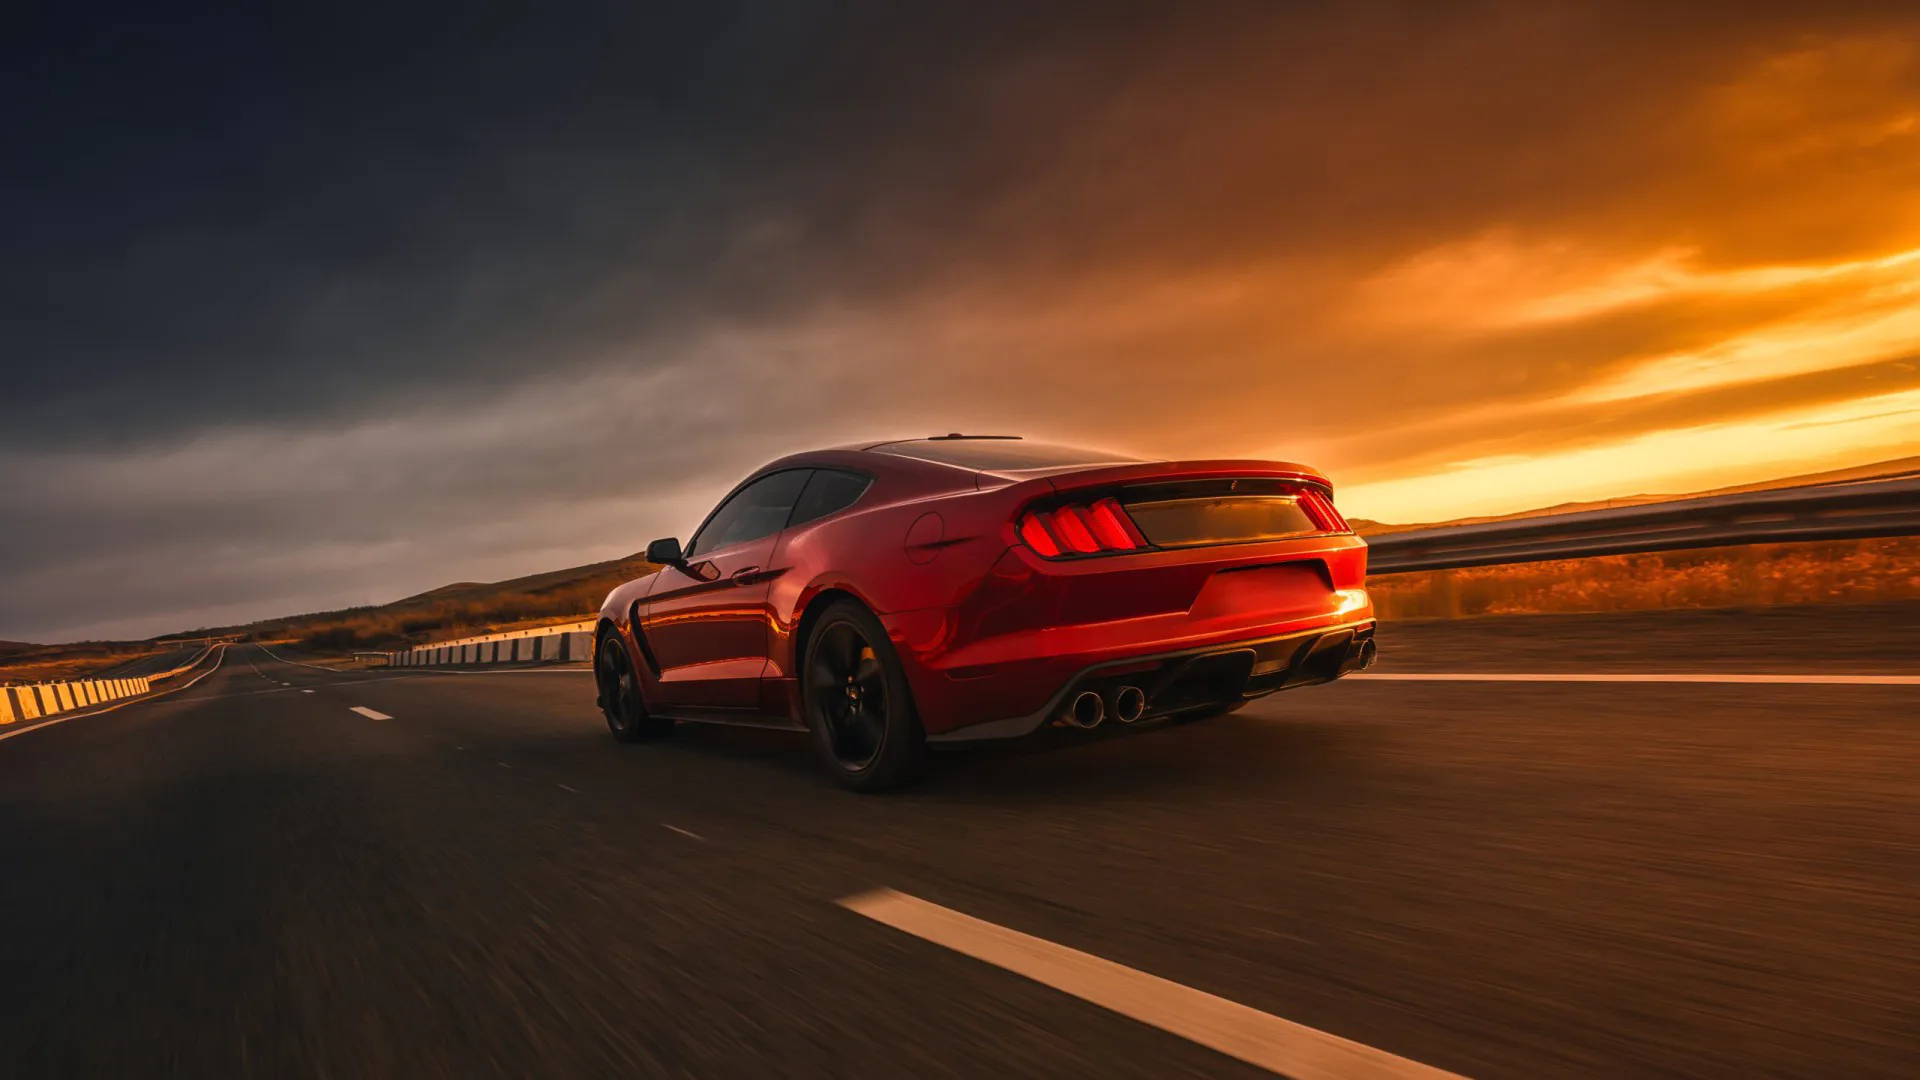 2015 Ford Mustang driving on a highway at sunset